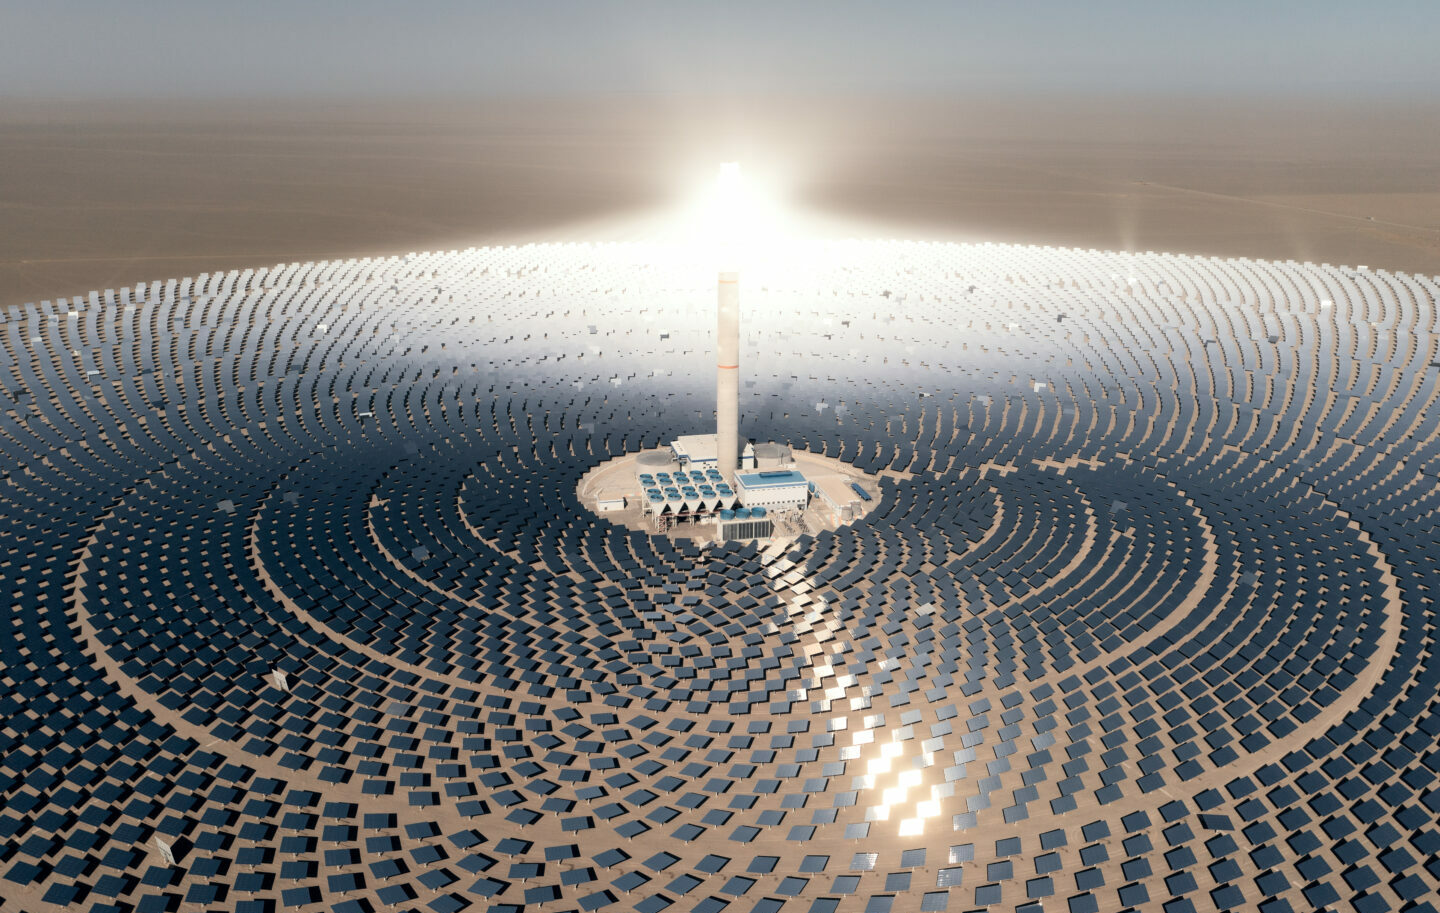 NEW release in our joint series with German newspaper HANDELSBLATT: “Green ideas that might change the world”, this time on CONCENTRATED SOLAR POWER